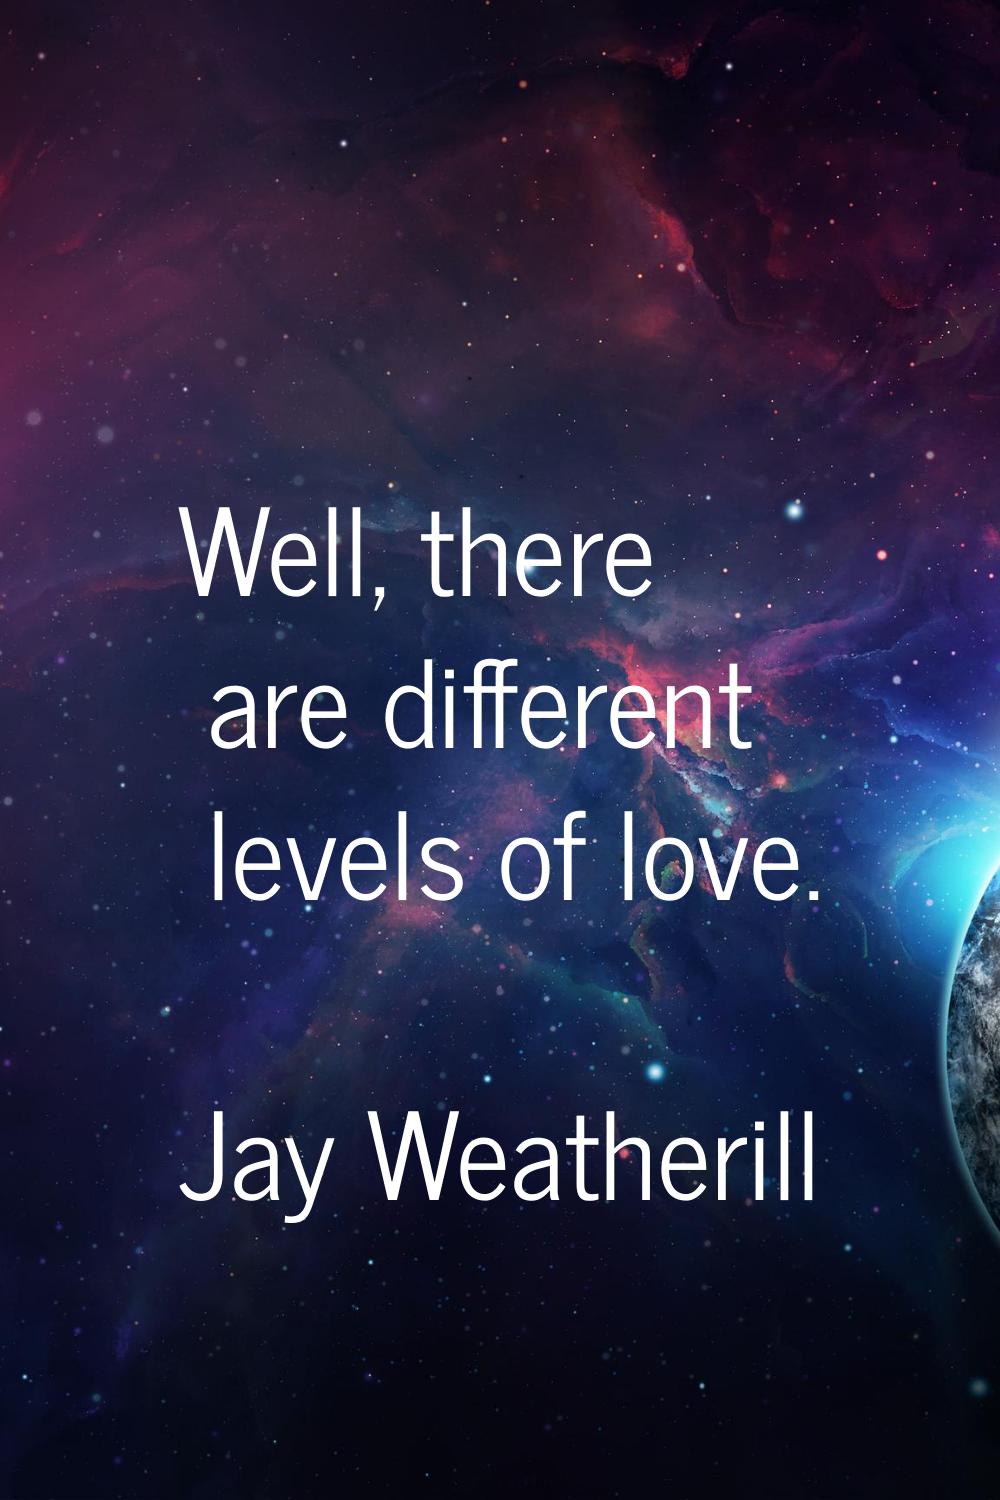 Well, there are different levels of love.